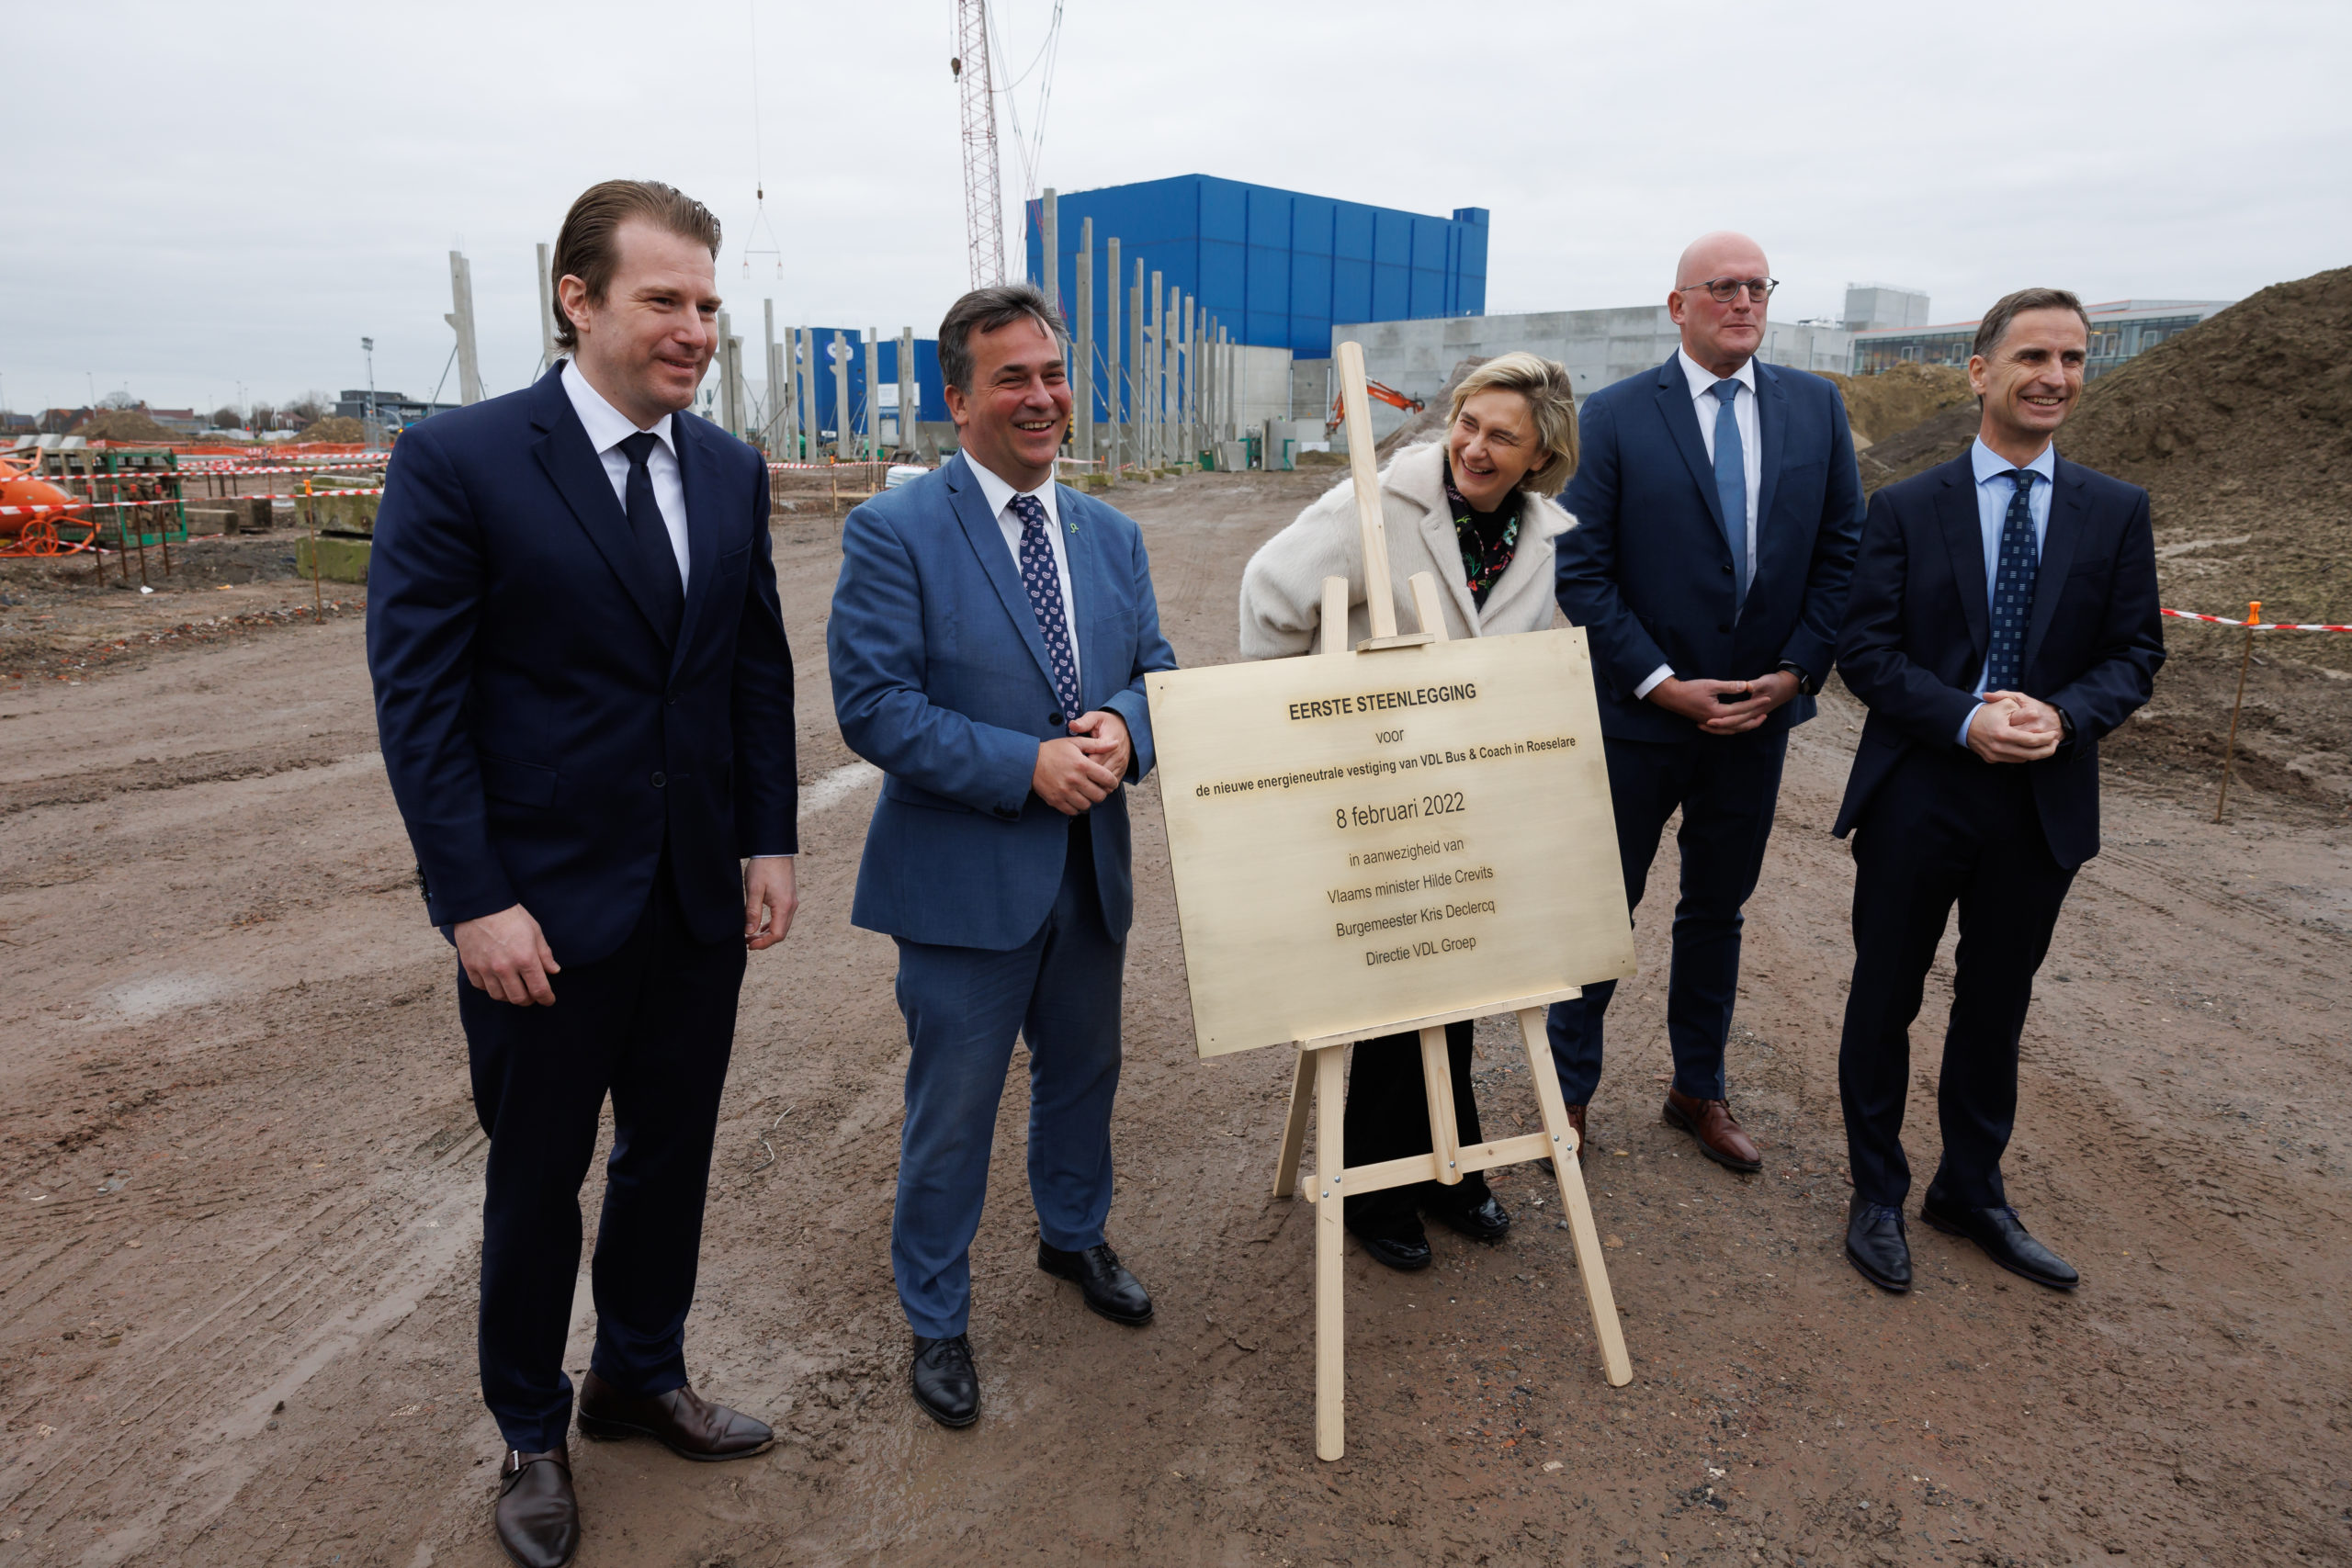 VDL casts first stone of new e-bus plant in Roeselare